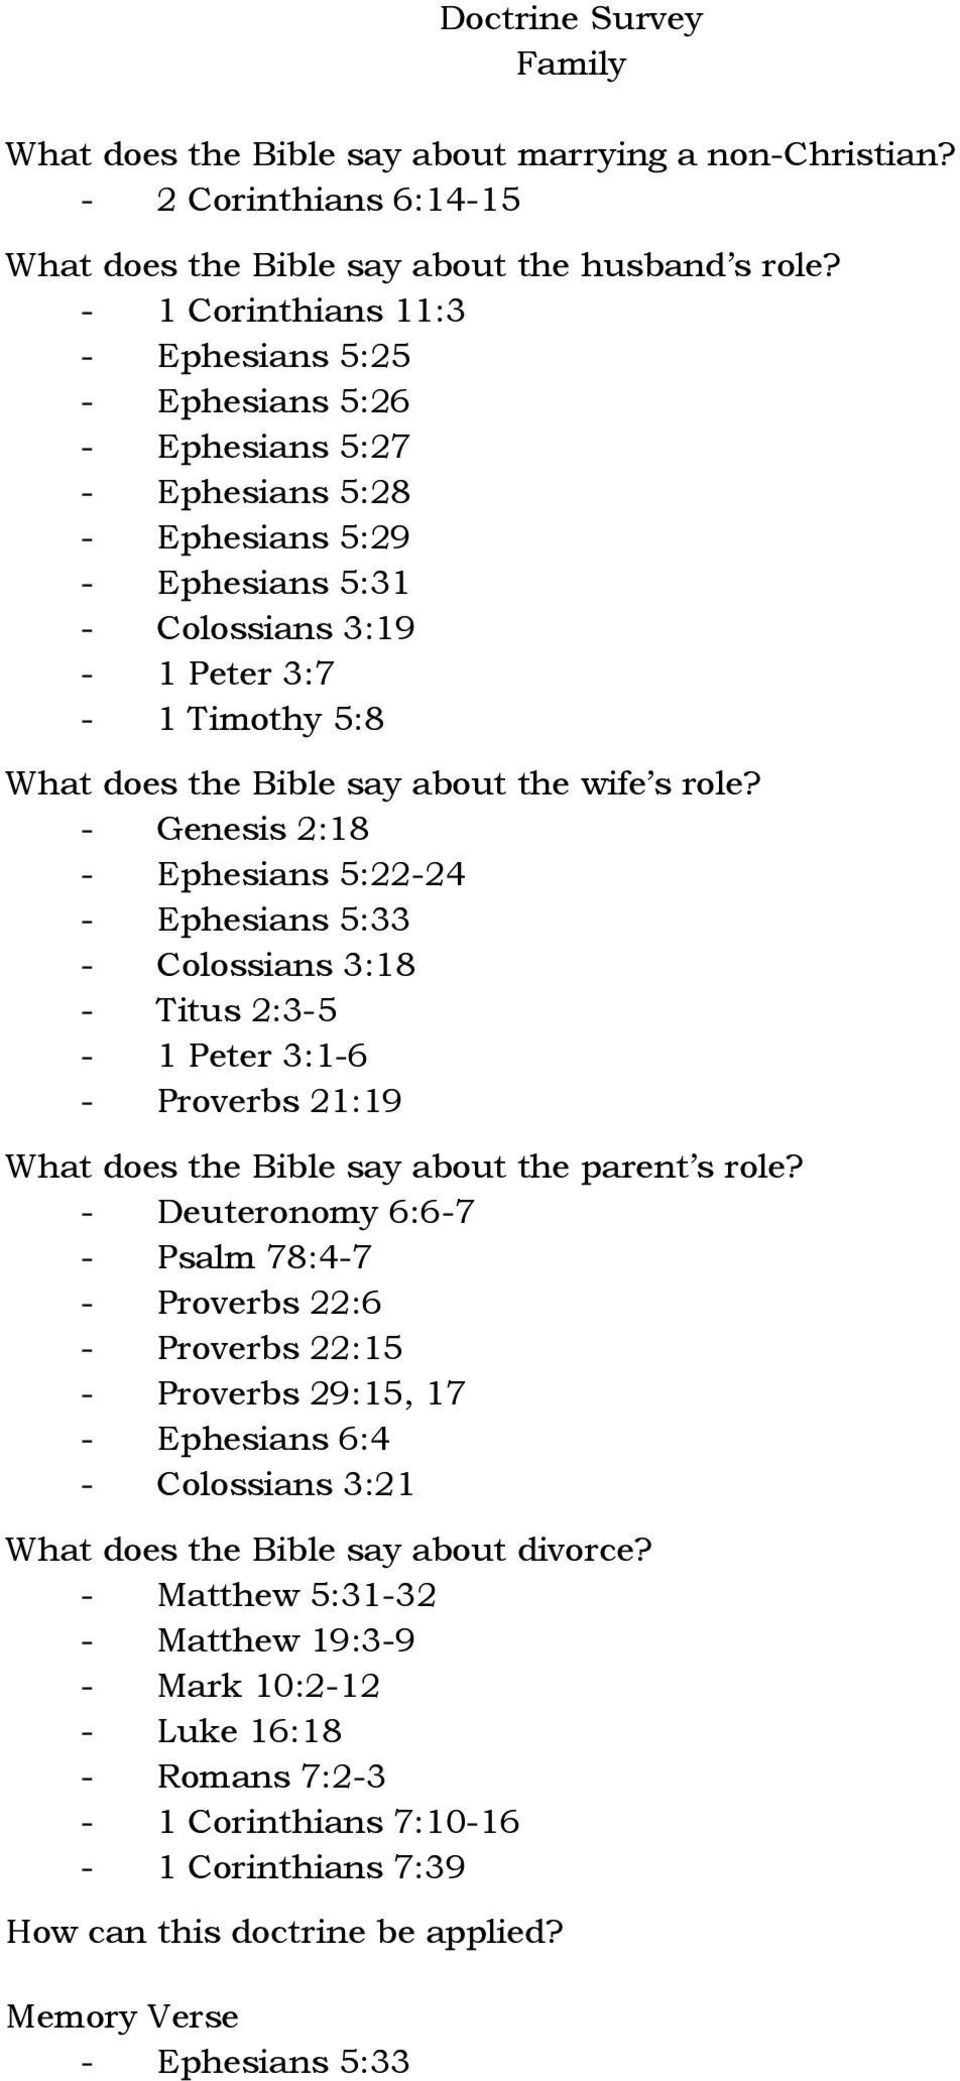 the wife s role? - Genesis 2:18 - Ephesians 5:22-24 - Ephesians 5:33 - Colossians 3:18 - Titus 2:3-5 - 1 Peter 3:1-6 - Proverbs 21:19 What does the Bible say about the parent s role?